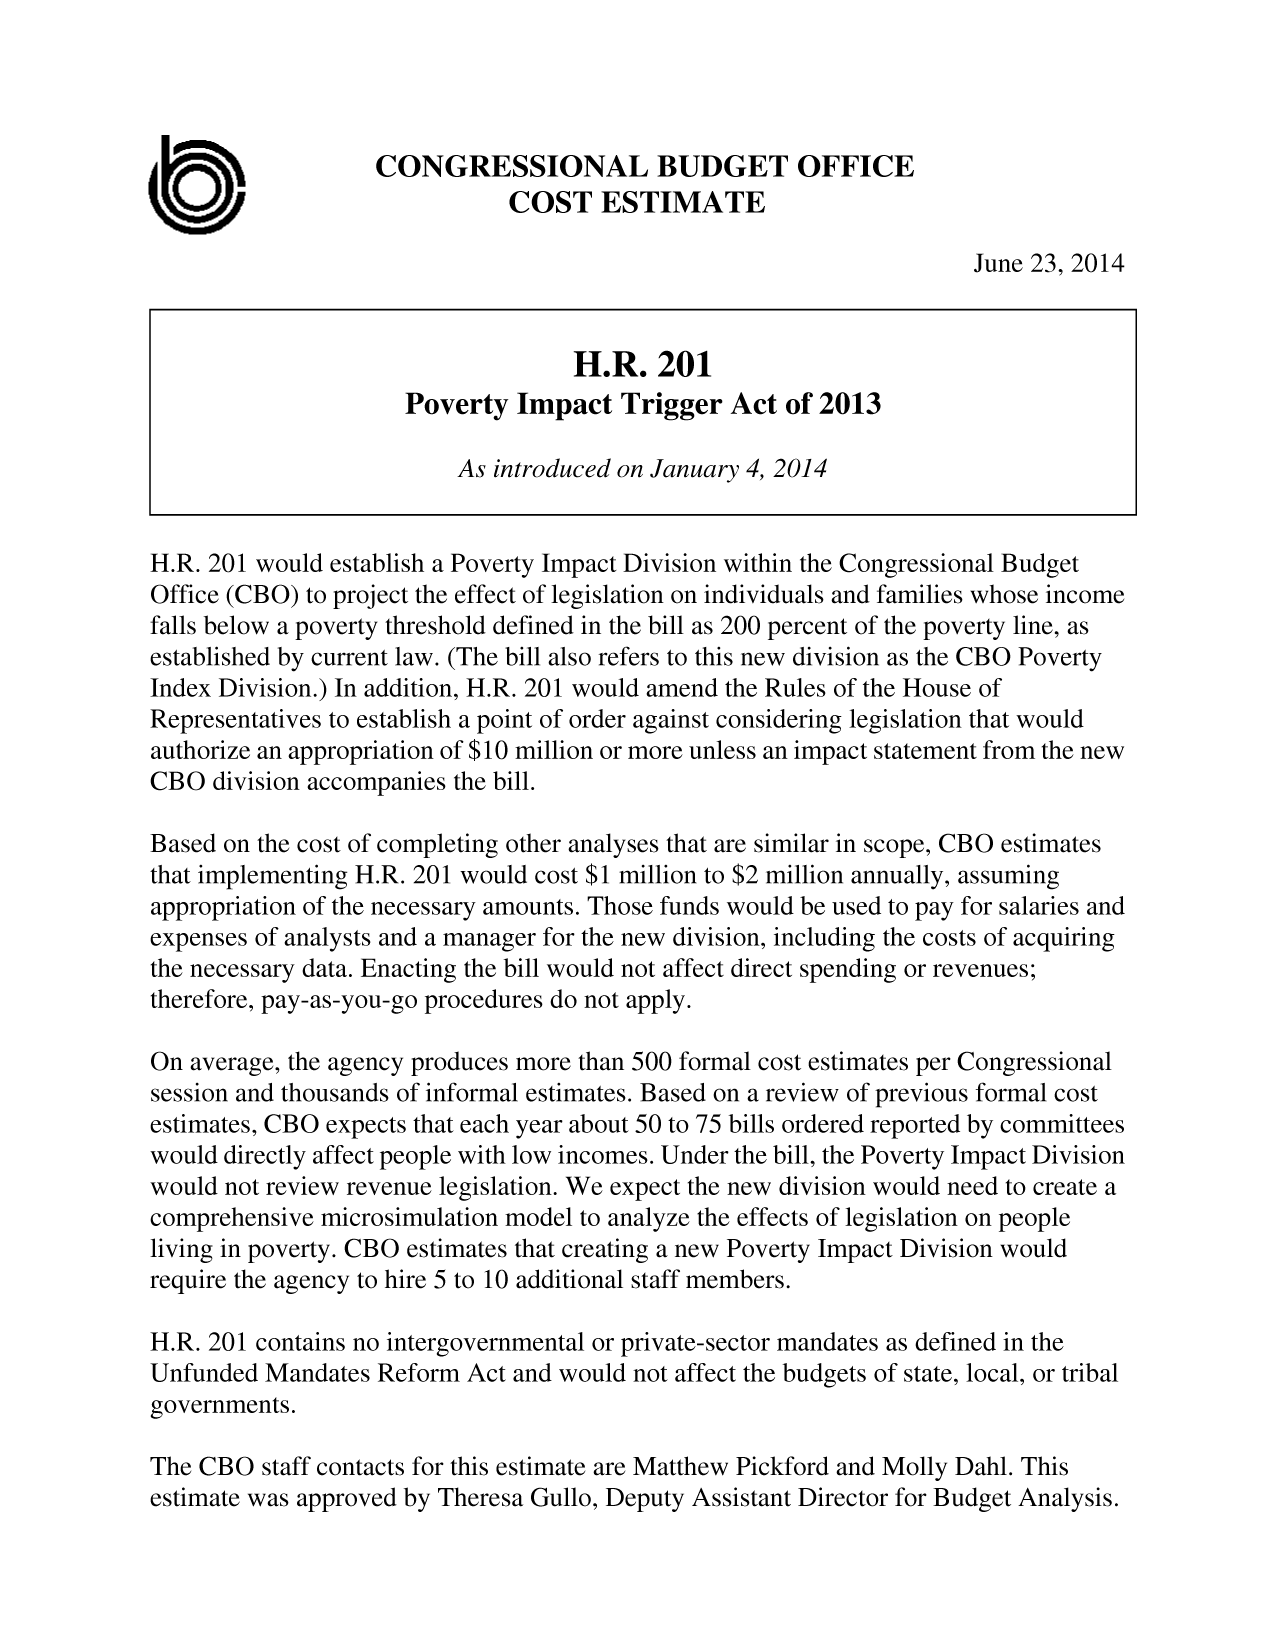 handle is hein.congrec/cbo1693 and id is 1 raw text is: CONGRESSIONAL BUDGET OFFICE
COST ESTIMATE
June 23, 2014
H.R. 201
Poverty Impact Trigger Act of 2013
As introduced on January 4, 2014
H.R. 201 would establish a Poverty Impact Division within the Congressional Budget
Office (CBO) to project the effect of legislation on individuals and families whose income
falls below a poverty threshold defined in the bill as 200 percent of the poverty line, as
established by current law. (The bill also refers to this new division as the CBO Poverty
Index Division.) In addition, H.R. 201 would amend the Rules of the House of
Representatives to establish a point of order against considering legislation that would
authorize an appropriation of $10 million or more unless an impact statement from the new
CBO division accompanies the bill.
Based on the cost of completing other analyses that are similar in scope, CBO estimates
that implementing H.R. 201 would cost $1 million to $2 million annually, assuming
appropriation of the necessary amounts. Those funds would be used to pay for salaries and
expenses of analysts and a manager for the new division, including the costs of acquiring
the necessary data. Enacting the bill would not affect direct spending or revenues;
therefore, pay-as-you-go procedures do not apply.
On average, the agency produces more than 500 formal cost estimates per Congressional
session and thousands of informal estimates. Based on a review of previous formal cost
estimates, CBO expects that each year about 50 to 75 bills ordered reported by committees
would directly affect people with low incomes. Under the bill, the Poverty Impact Division
would not review revenue legislation. We expect the new division would need to create a
comprehensive microsimulation model to analyze the effects of legislation on people
living in poverty. CBO estimates that creating a new Poverty Impact Division would
require the agency to hire 5 to 10 additional staff members.
H.R. 201 contains no intergovernmental or private-sector mandates as defined in the
Unfunded Mandates Reform Act and would not affect the budgets of state, local, or tribal
governments.
The CBO staff contacts for this estimate are Matthew Pickford and Molly Dahl. This
estimate was approved by Theresa Gullo, Deputy Assistant Director for Budget Analysis.


